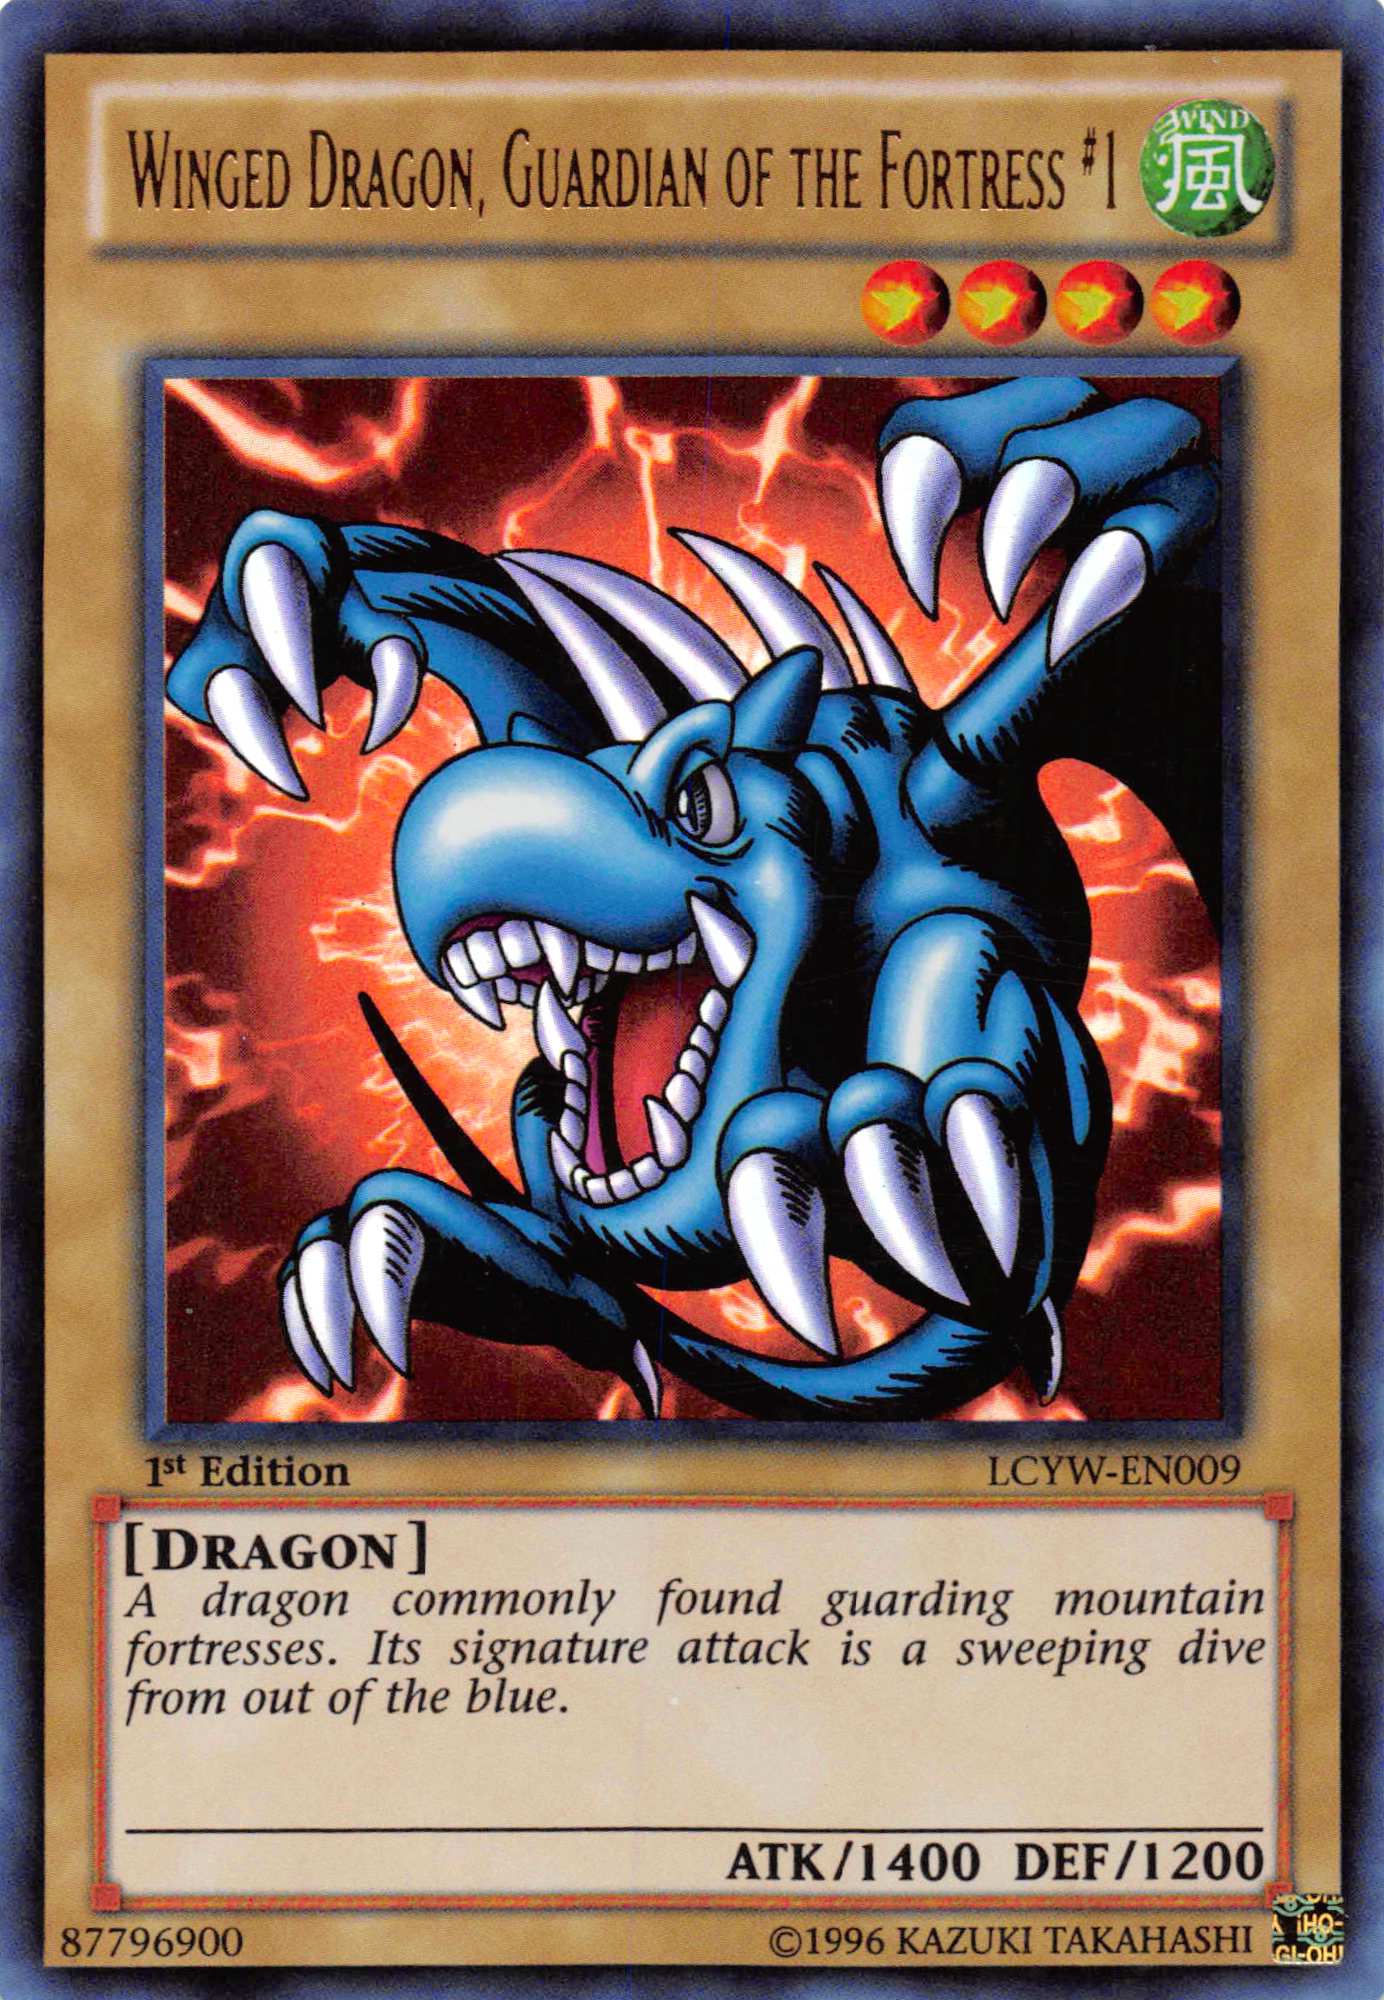 Winged Dragon, Guardian of the Fortress #1 [LCYW-EN009] Ultra Rare